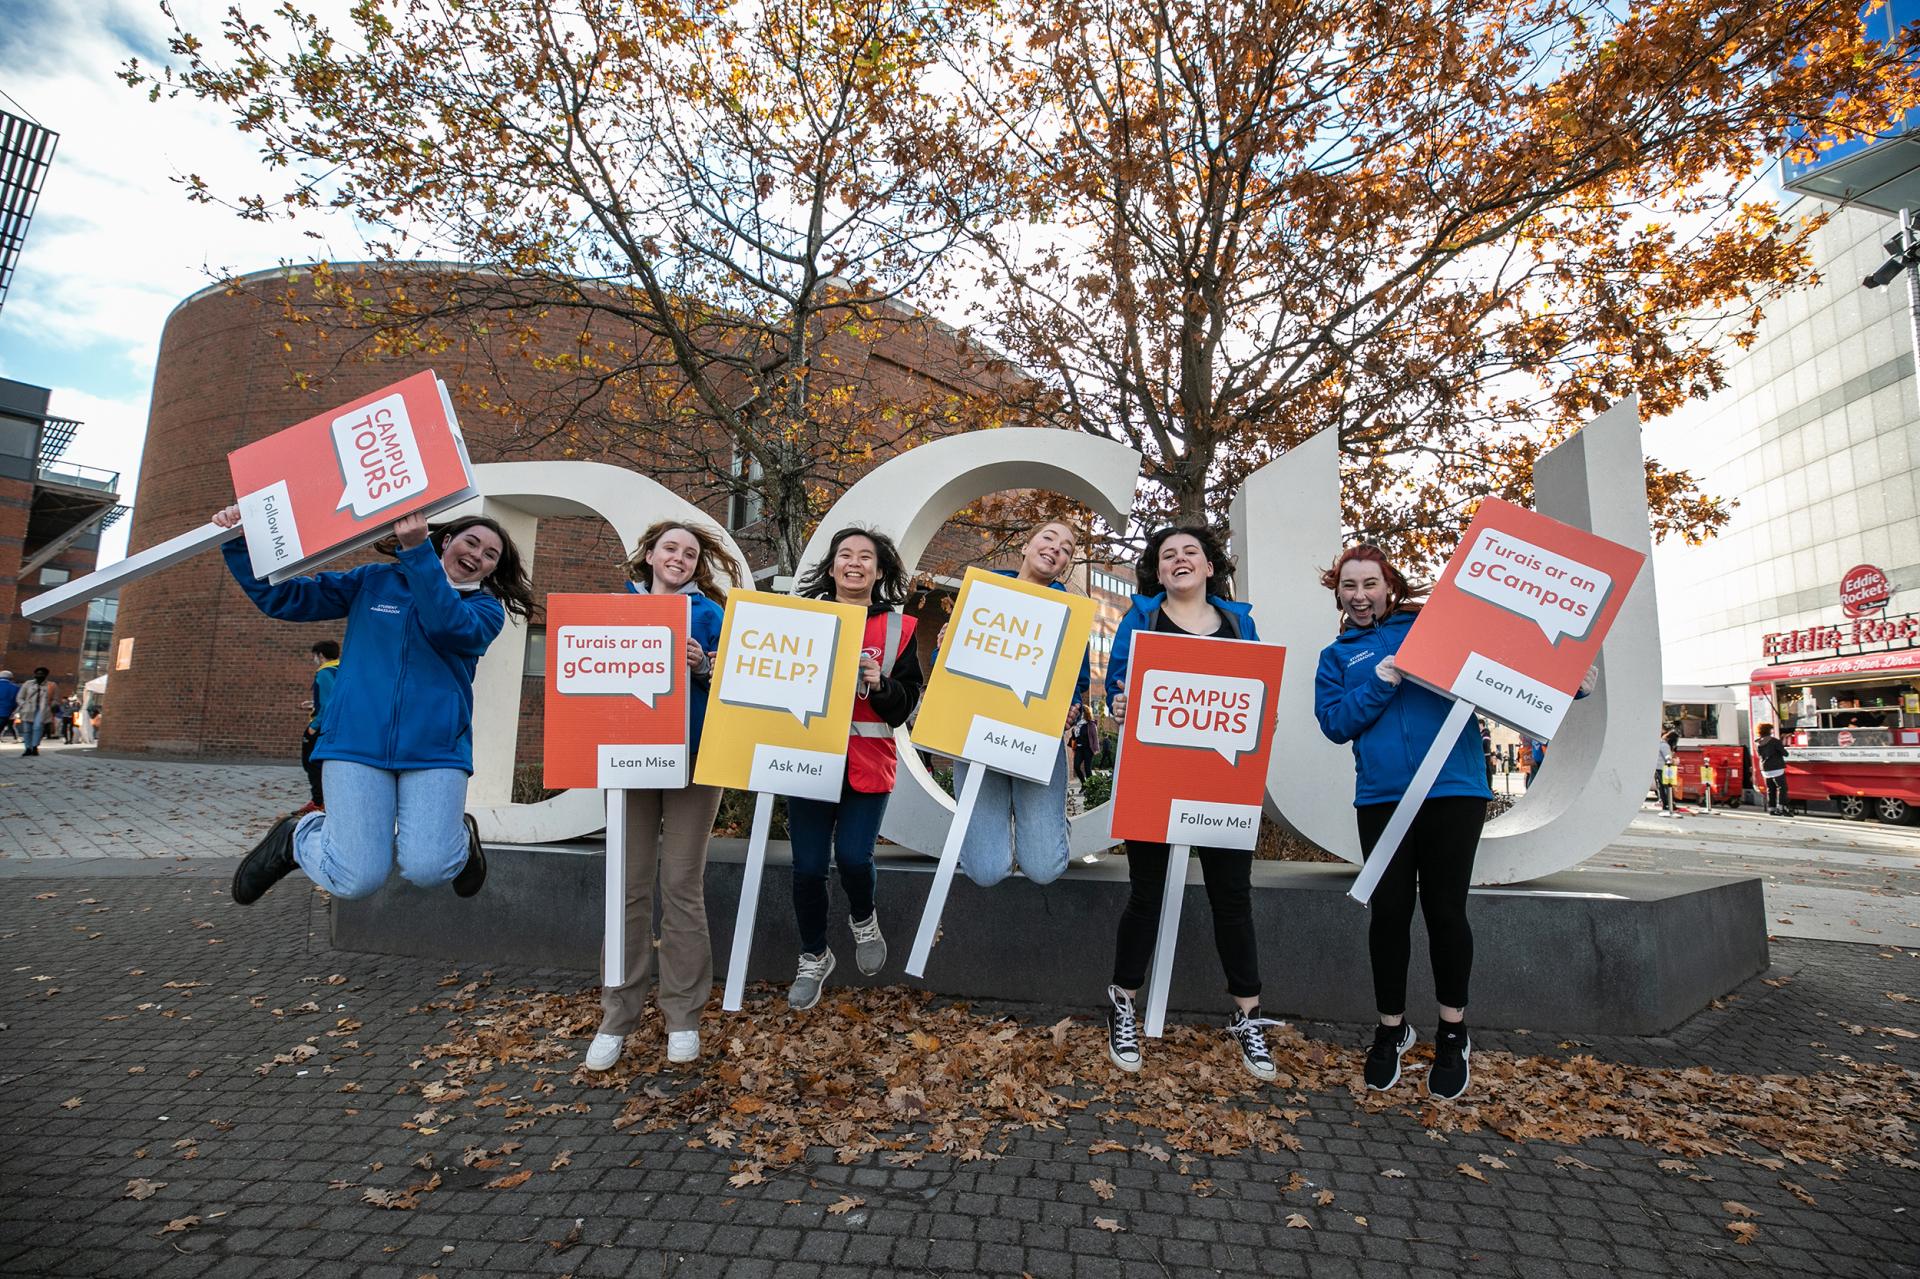 A group of Student Ambassadors are all jumping in front of the DCU Letters, holding signs encouraging people to ask questions and go on tours